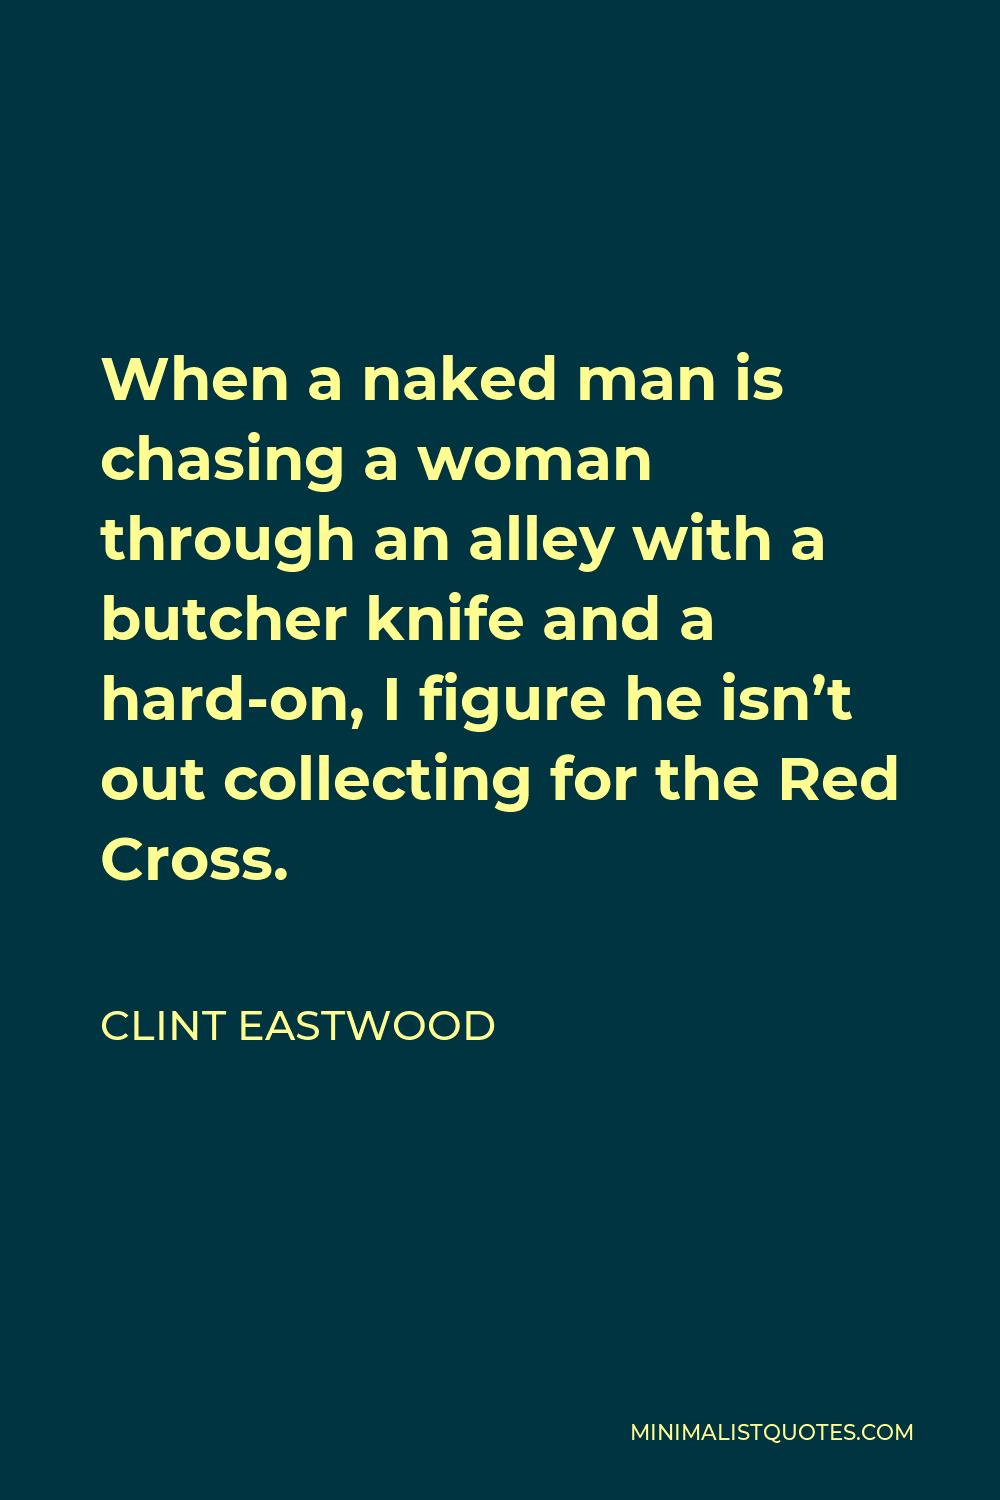 Clint Eastwood Quote - When a naked man is chasing a woman through an alley with a butcher knife and a hard-on, I figure he isn’t out collecting for the Red Cross.